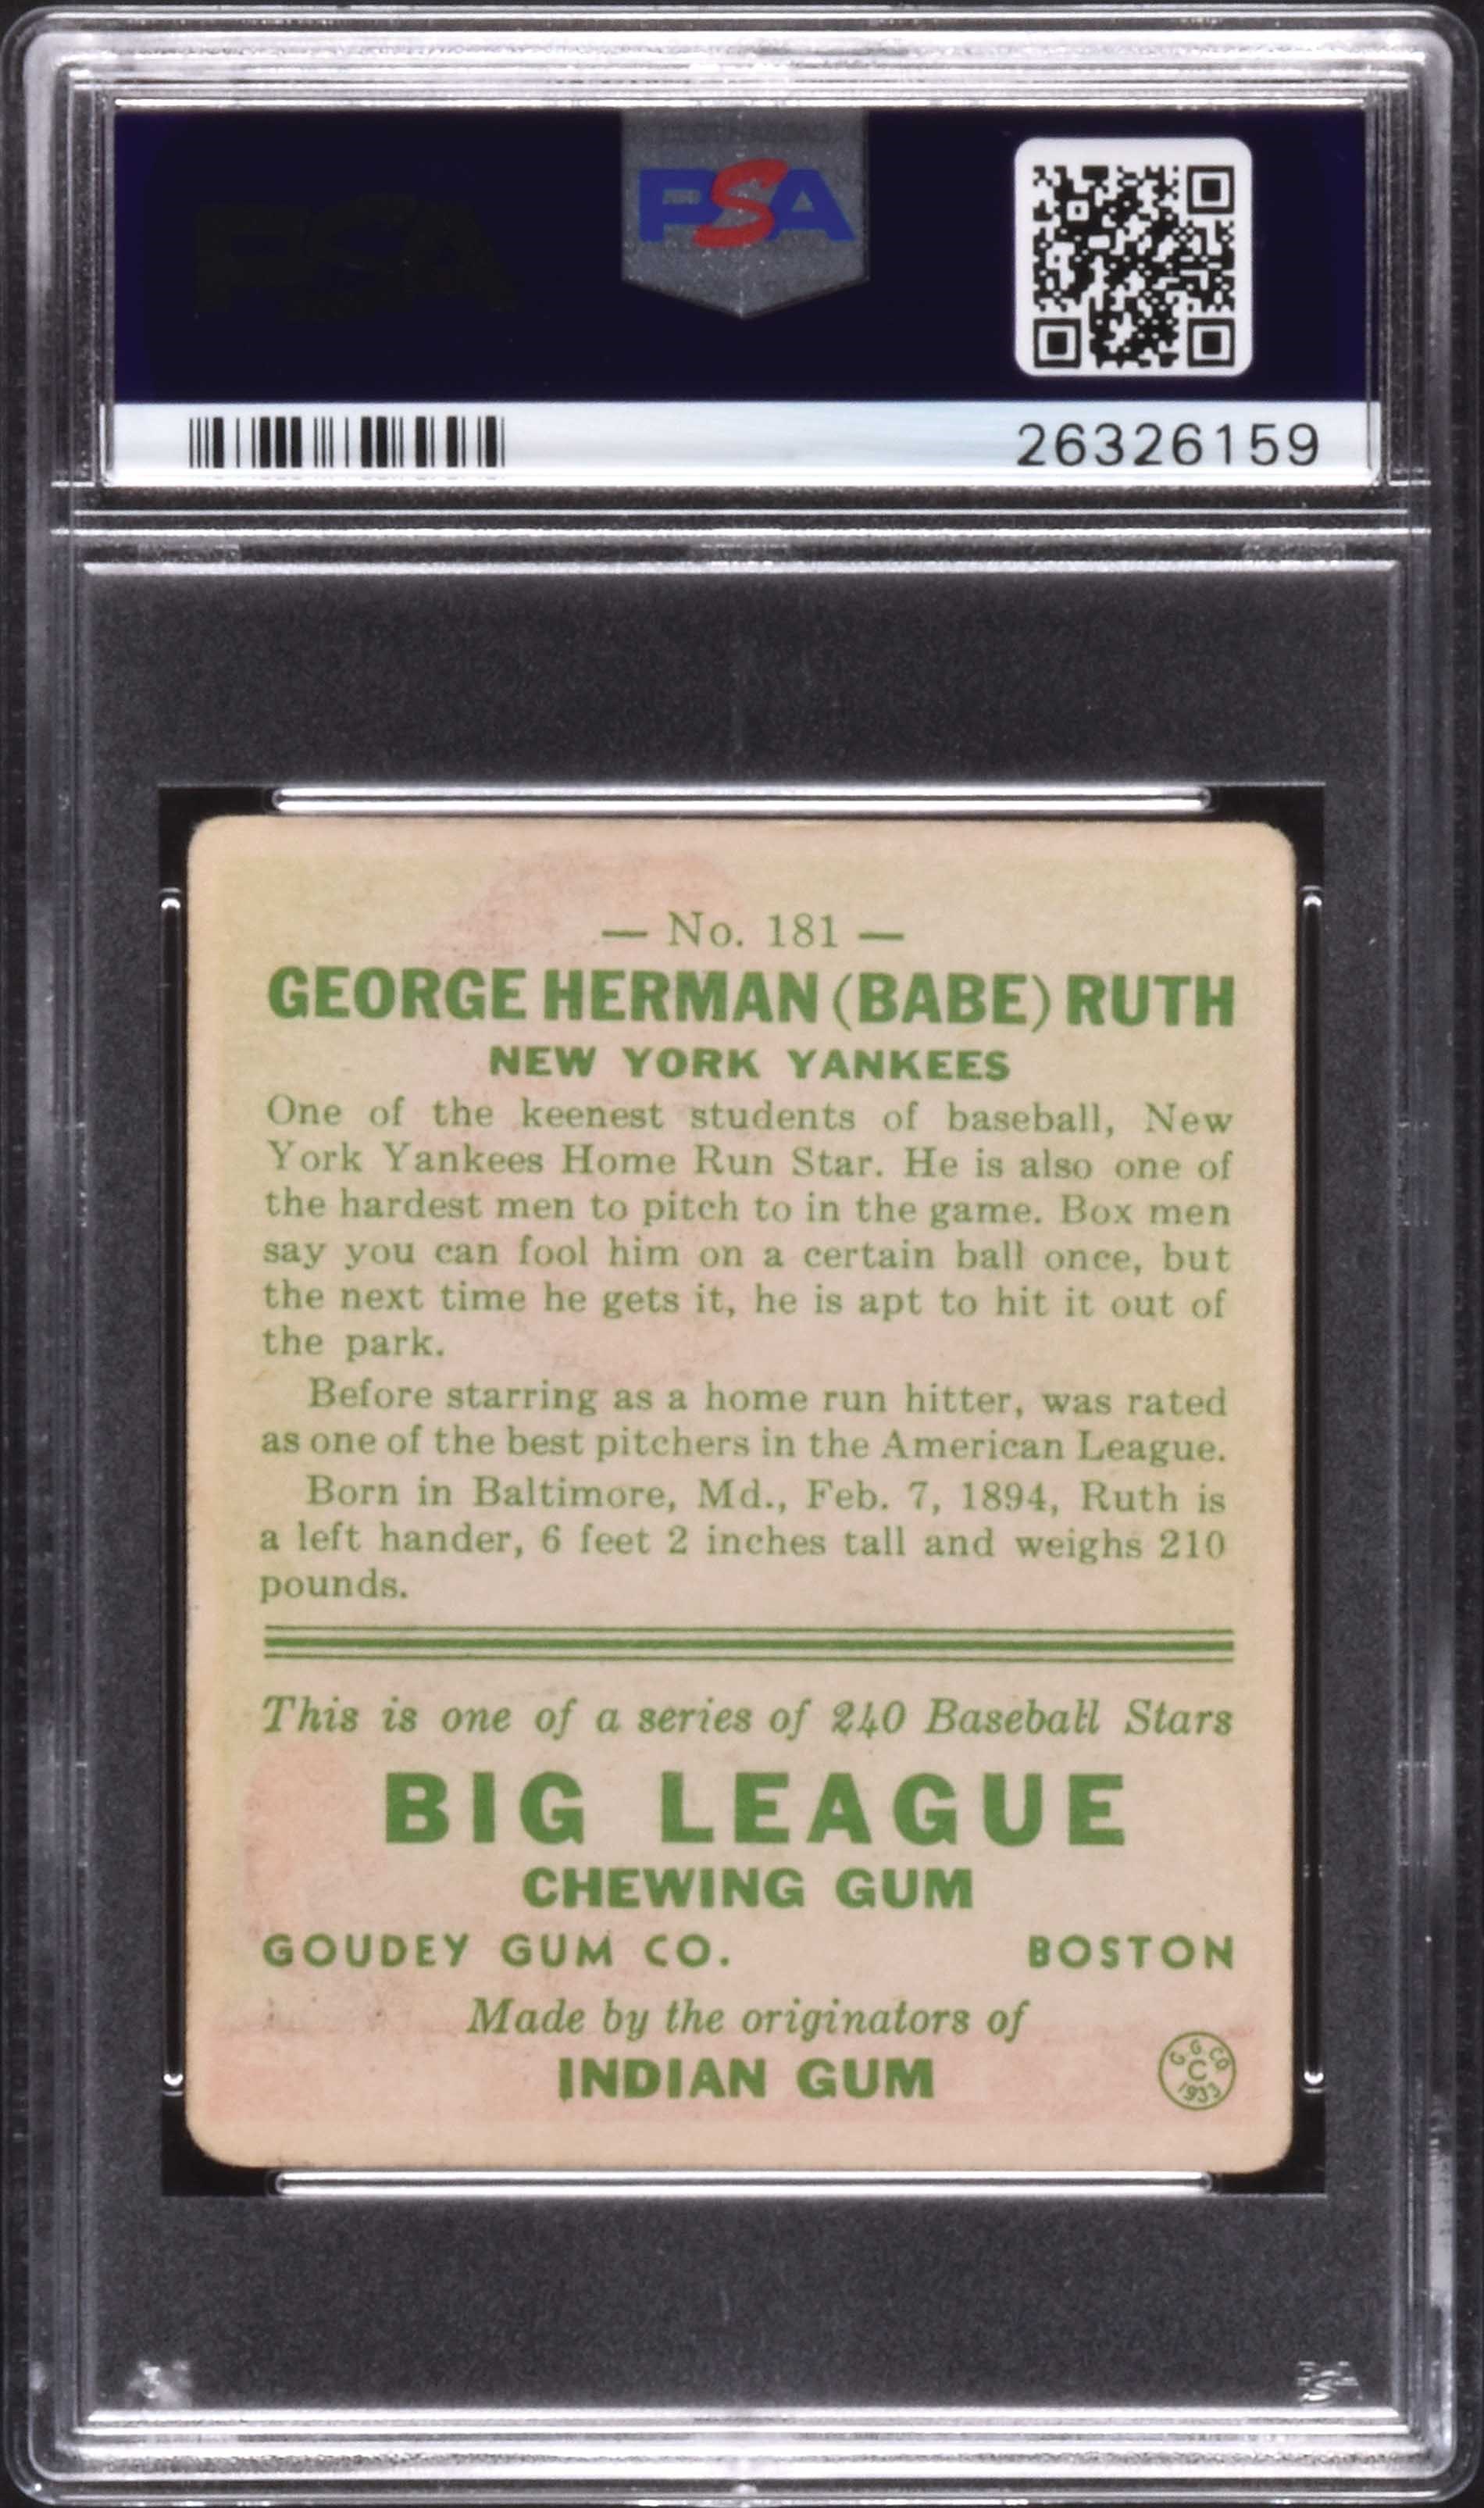 1933 Goudey BABE RUTH #181 with Facsimile Autographed front New York  Yankees - REPRINT